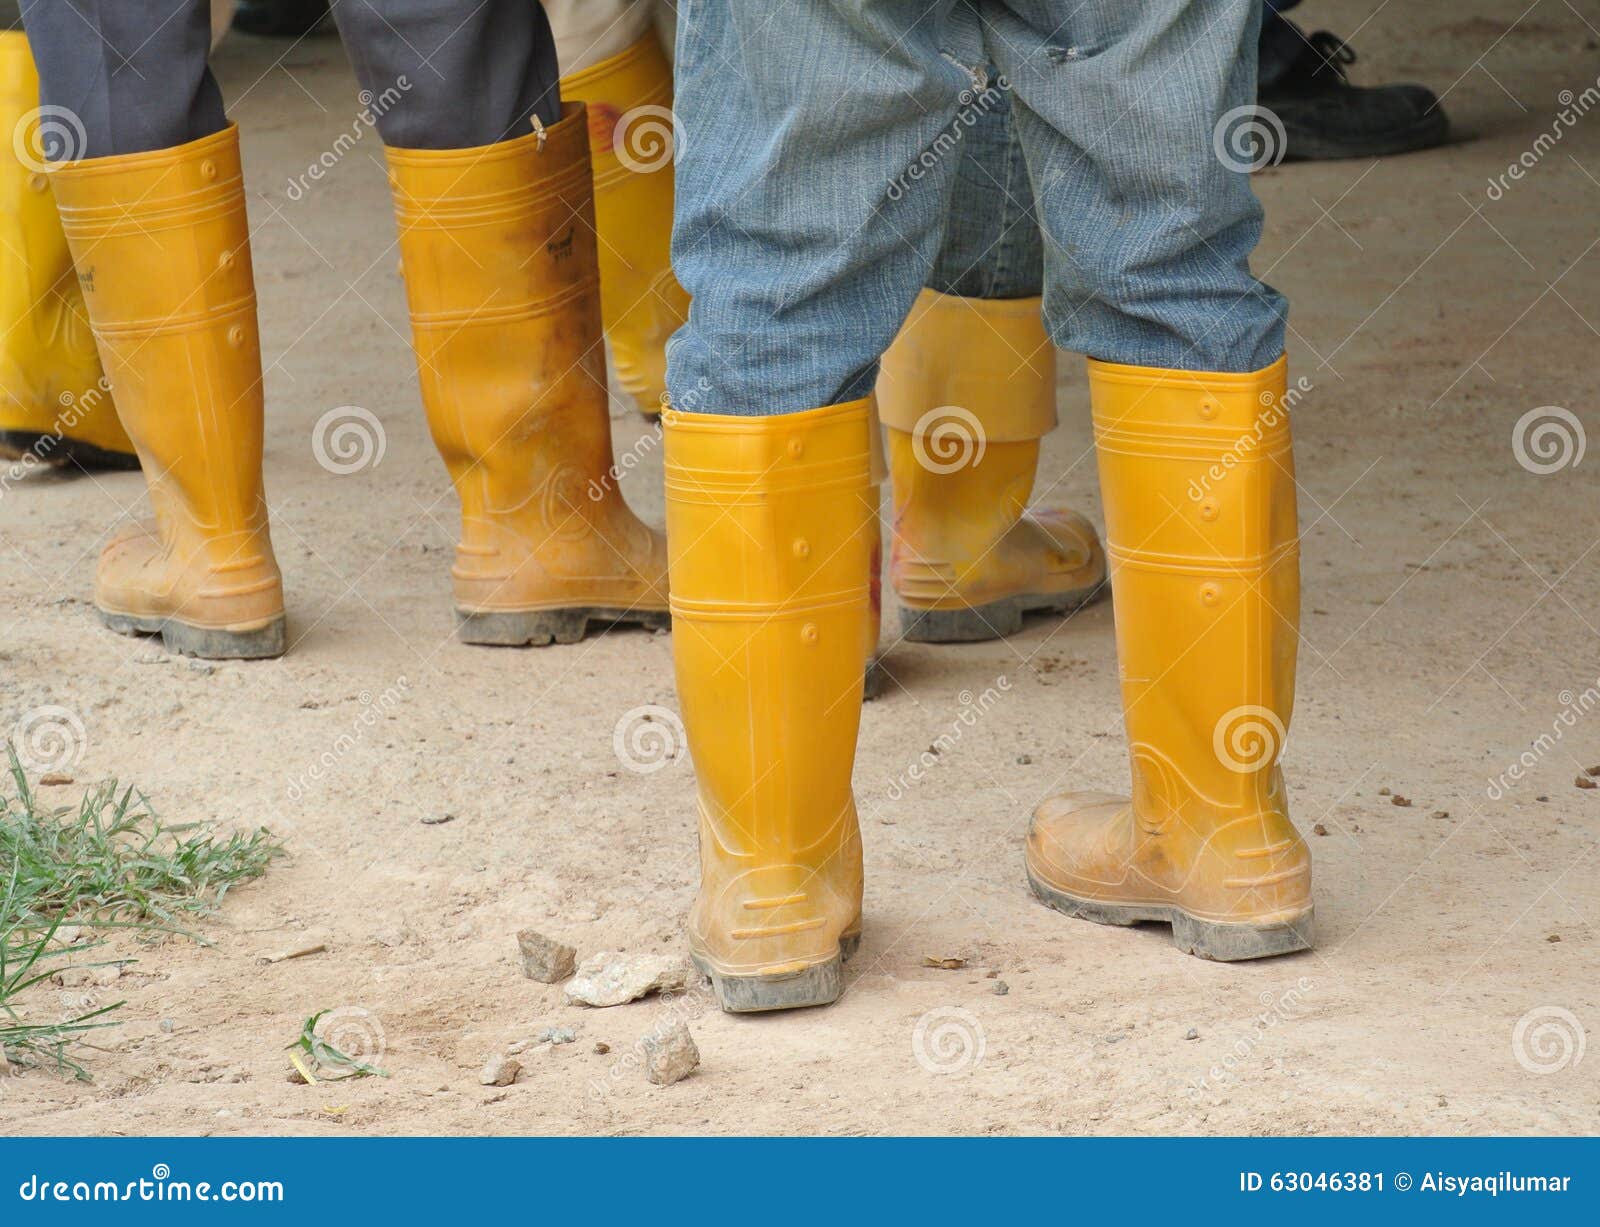 safety boots construction